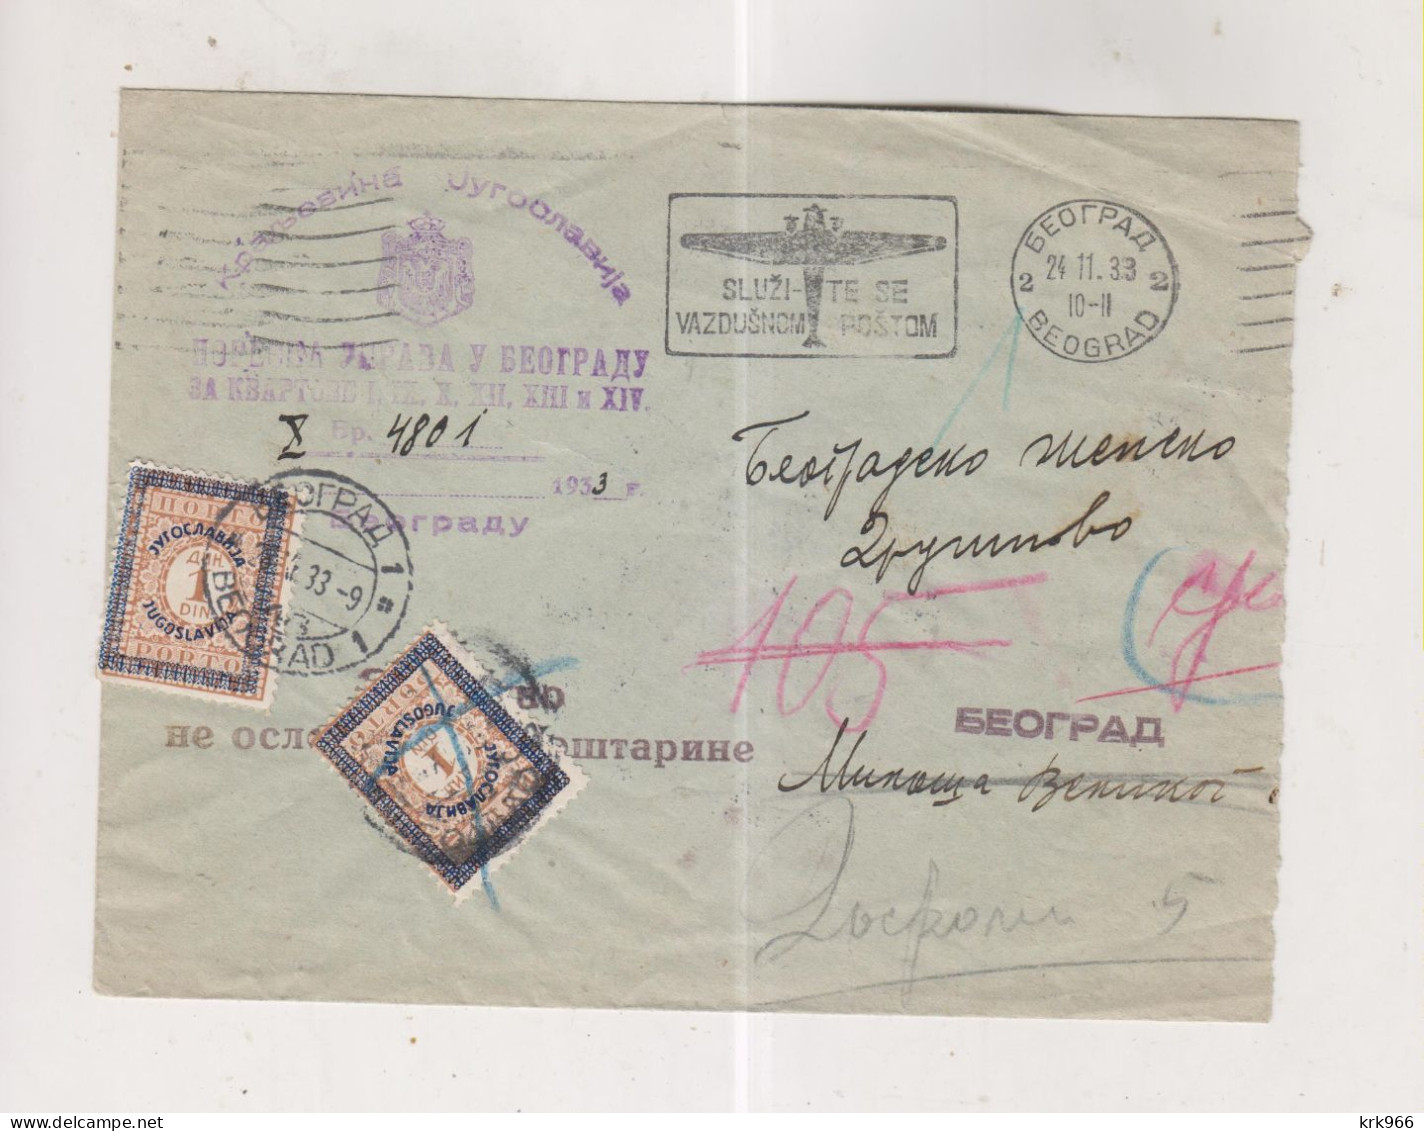 YUGOSLAVIA  BEOGRAD 1933 Nice Official Cover Postage Due - Covers & Documents